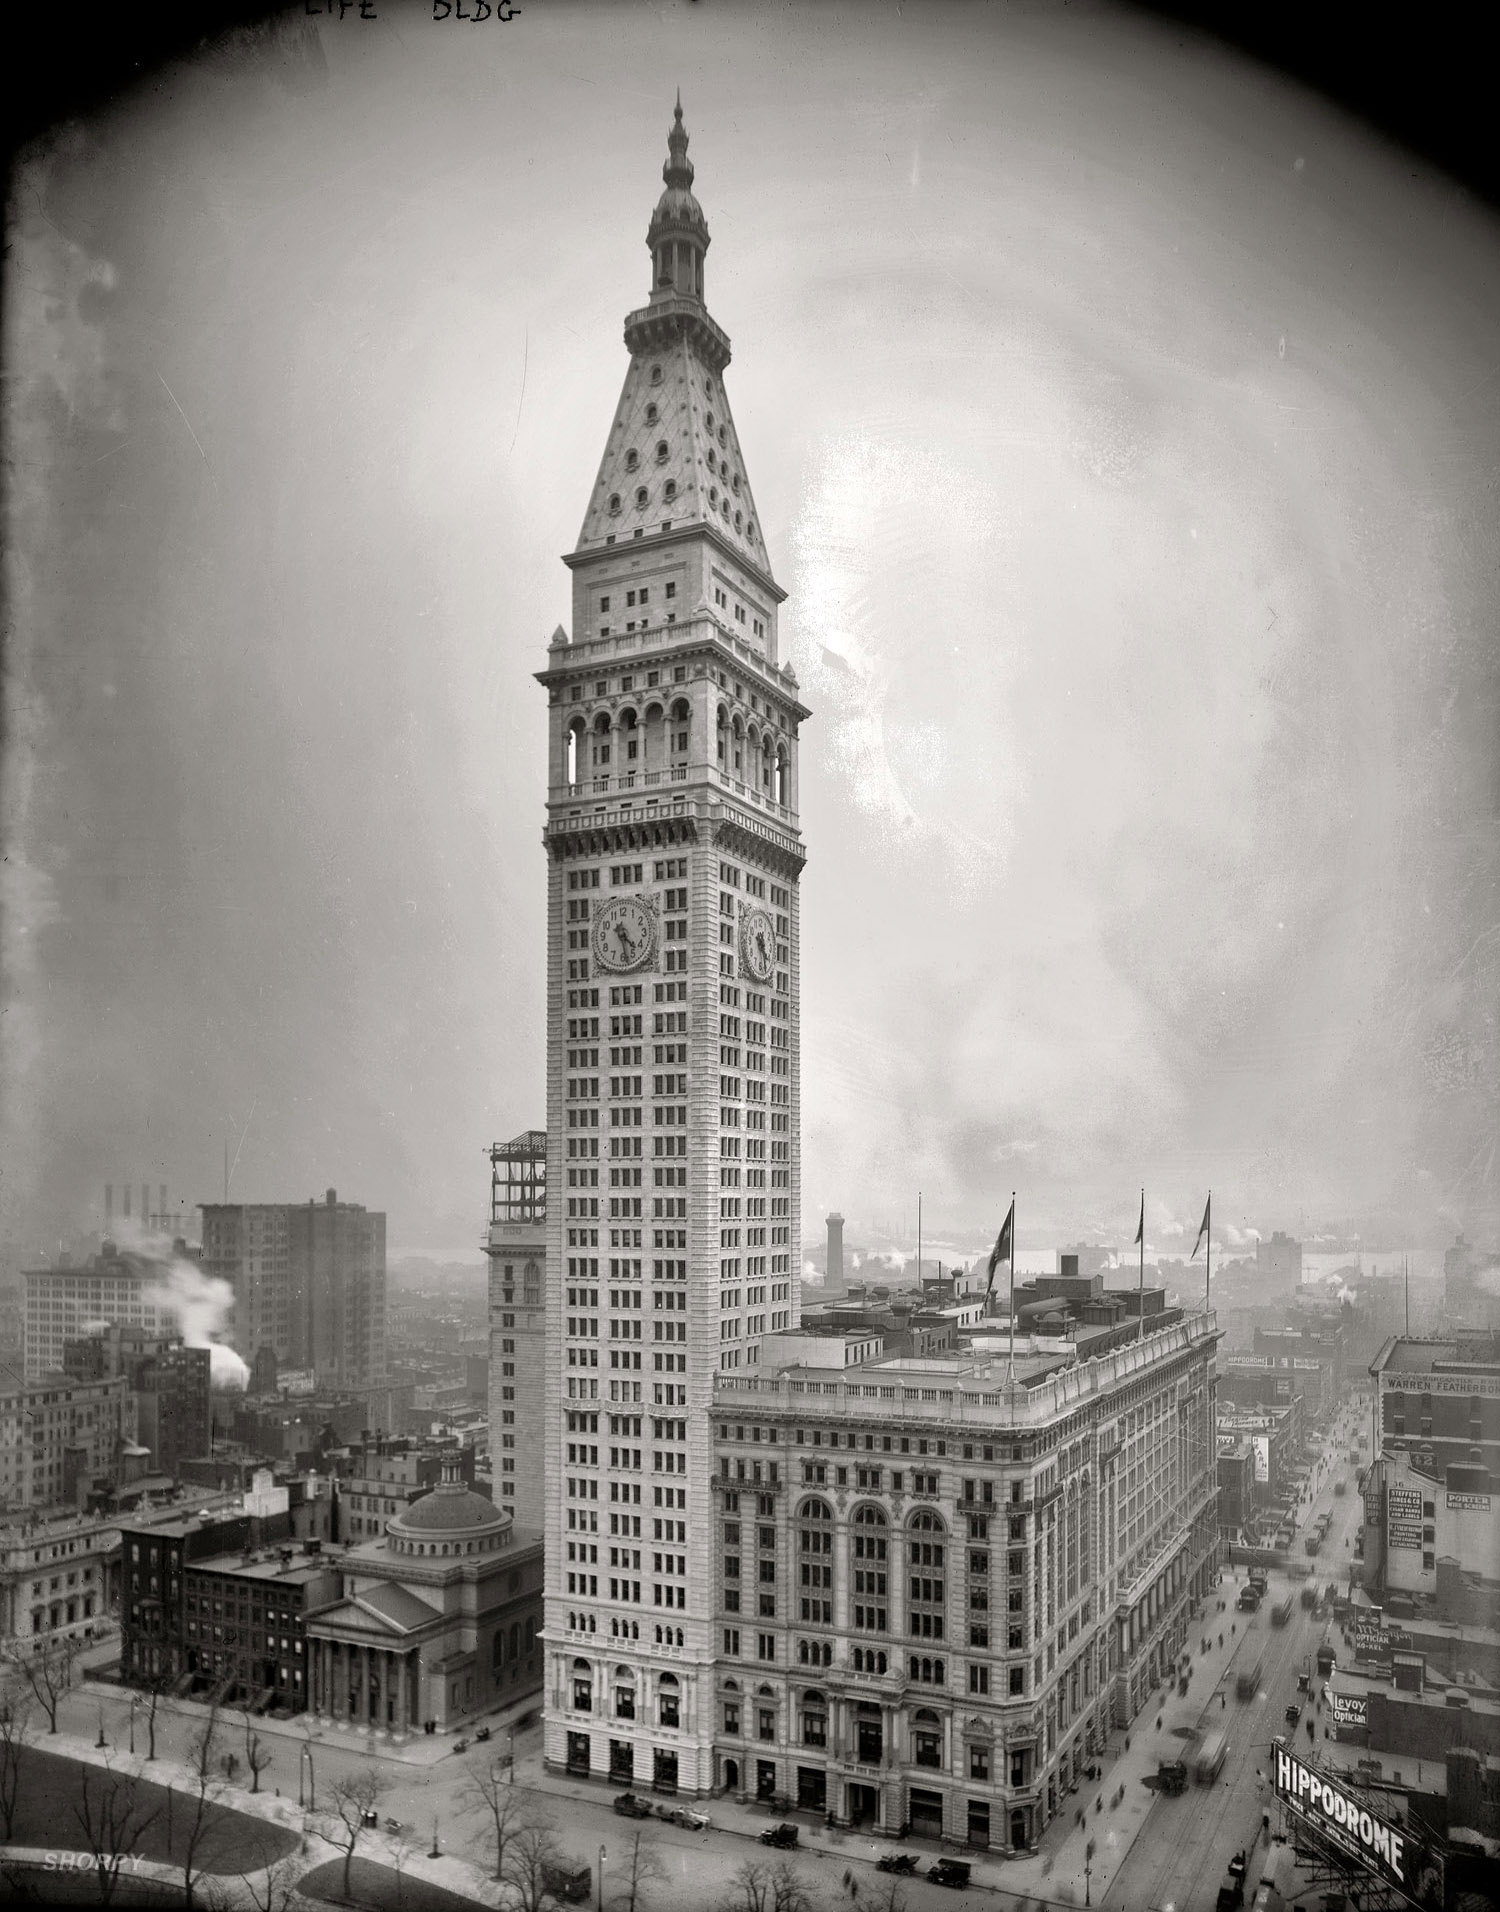 December 1909. "Met Life Building." The Metropolitan Life Insurance Co. tower on a gray winter afternoon in Manhattan the year of its completion. It was the tallest building in the world until 1913, when it was surpassed by the Woolworth Building. 8x10 glass negative, George Grantham Bain Collection. View full size.